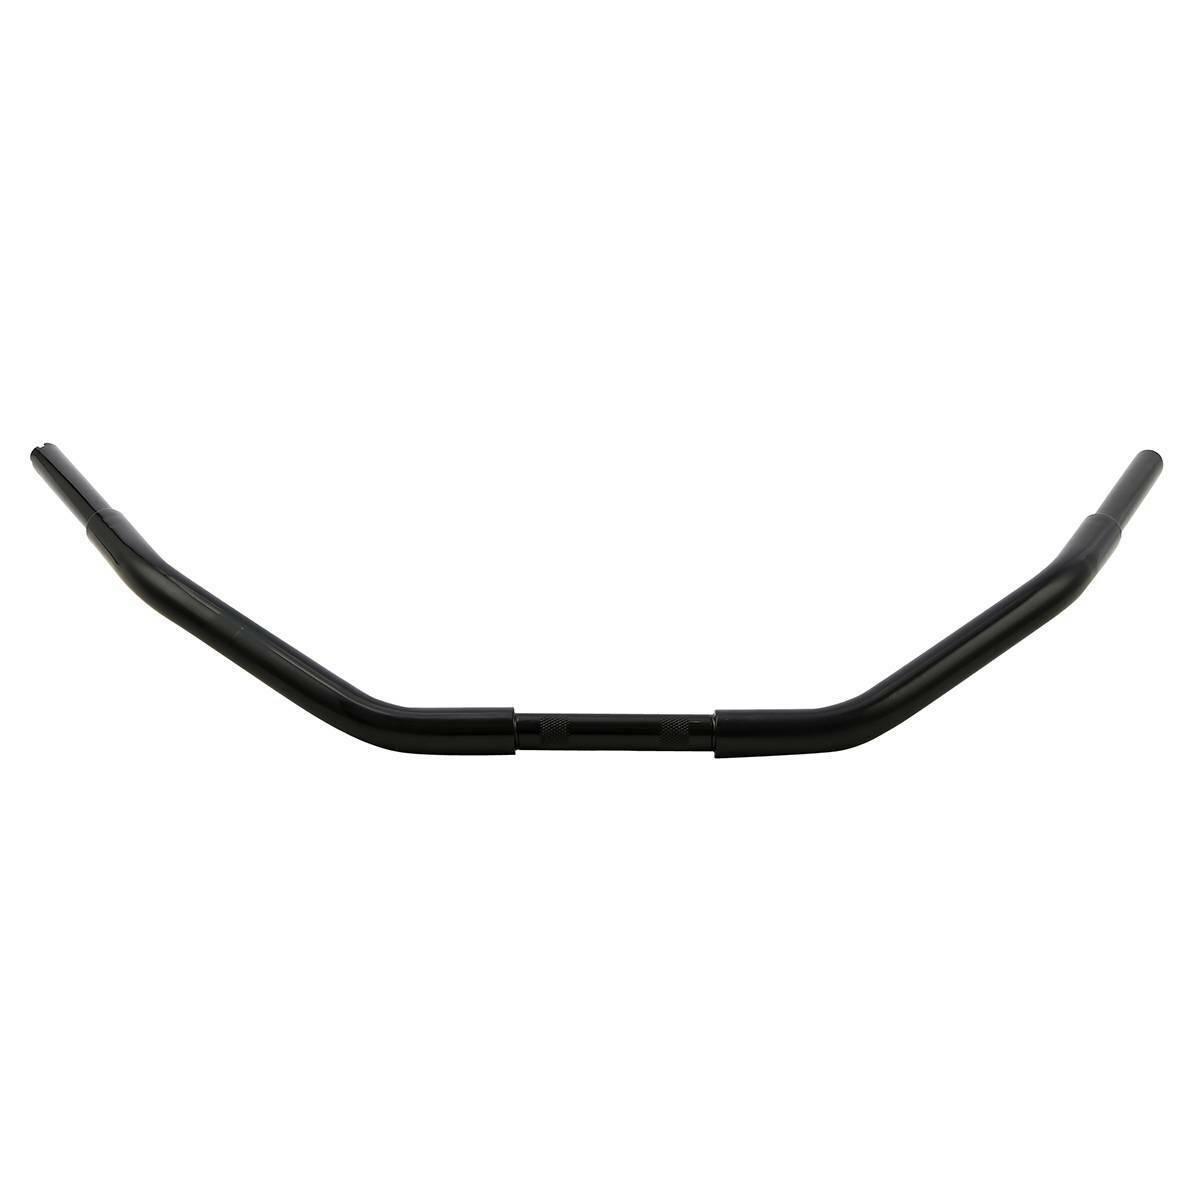 3.5" Rise Fat HandleBar Fit For Harley Sportster XL Softail Road King FLHR - Moto Life Products